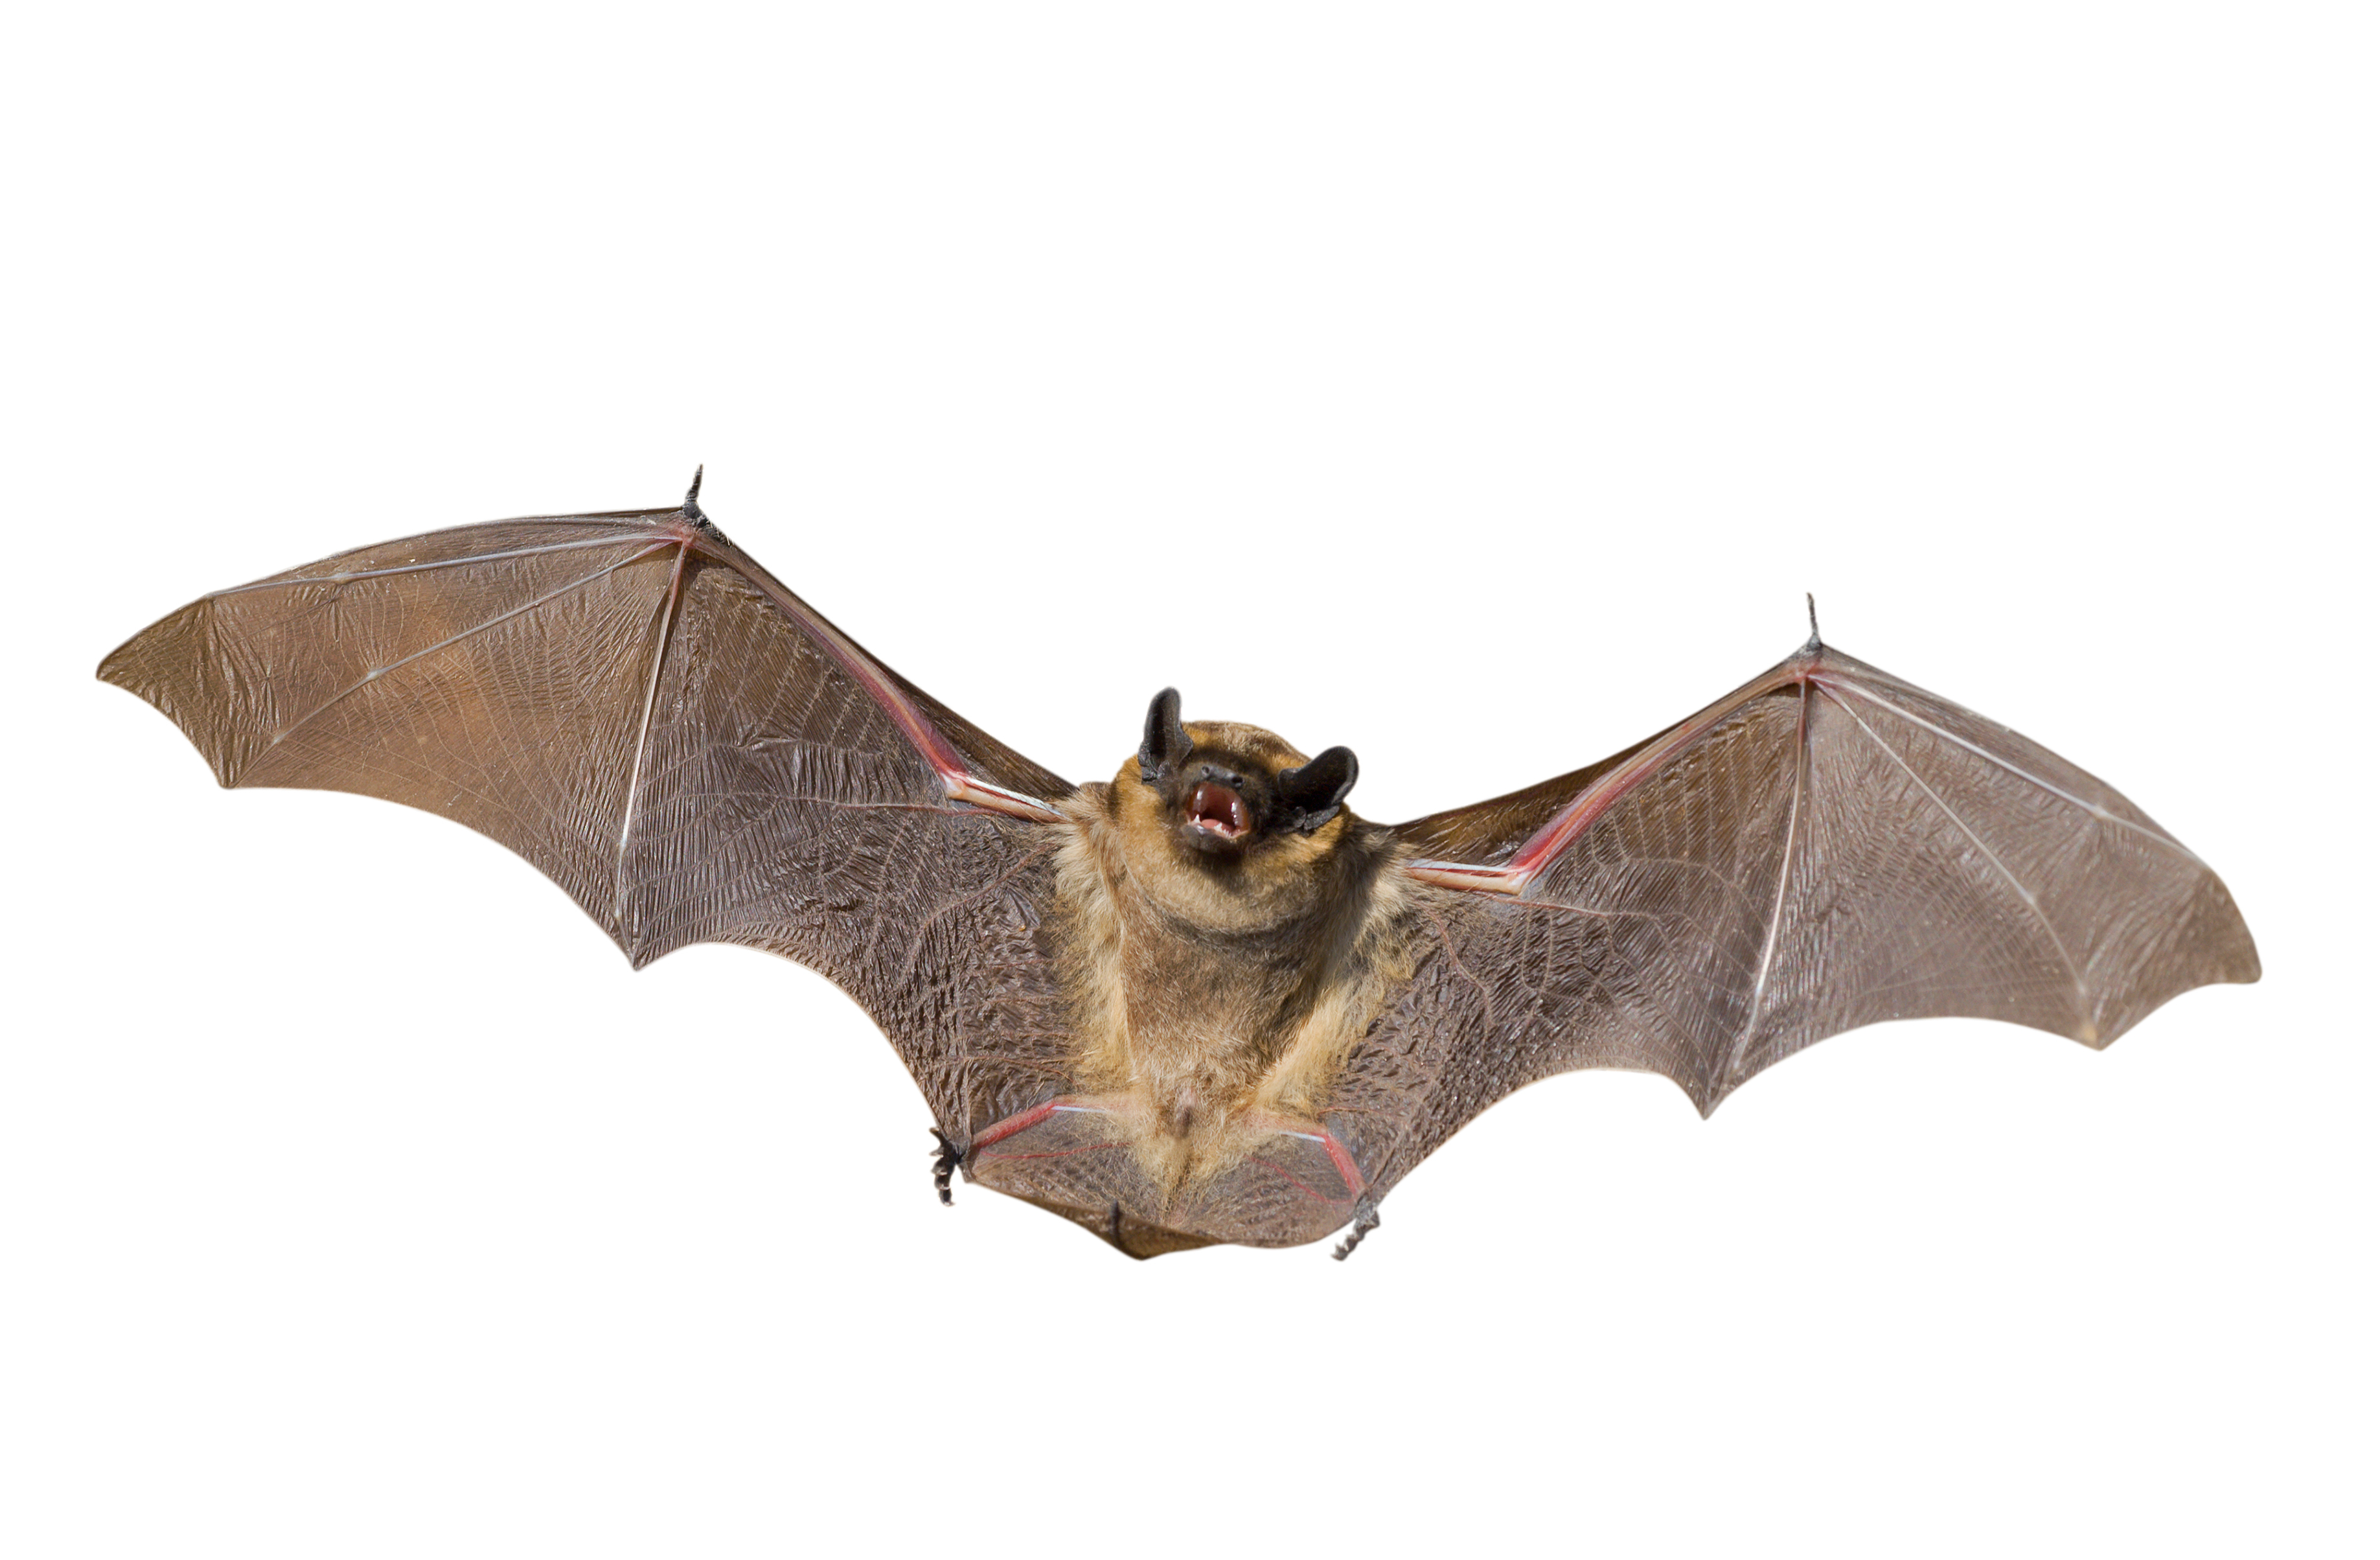 Bat Removal, Control, Repellent & Exclusion - How to Get Rid of ...